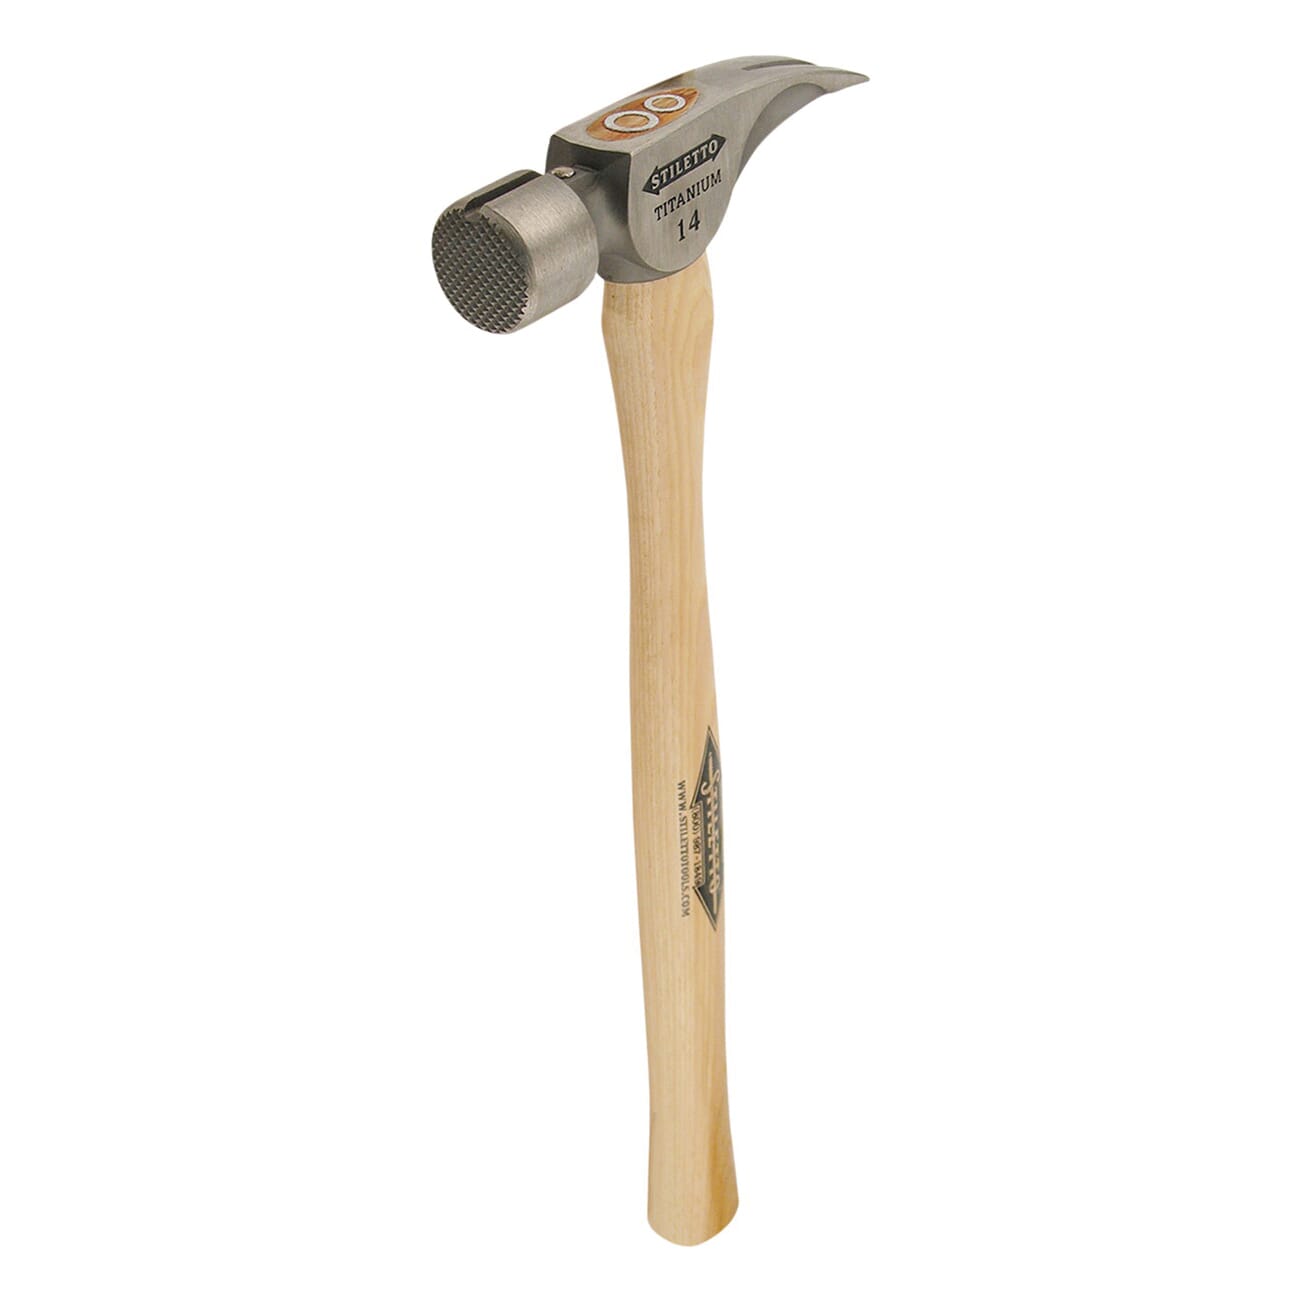 Stiletto® TI14MS Nailing Framing Hammer, 18 in OAL, Milled Surface, 14 oz Titanium Head, Straight Claw, Hickory Wood Handle